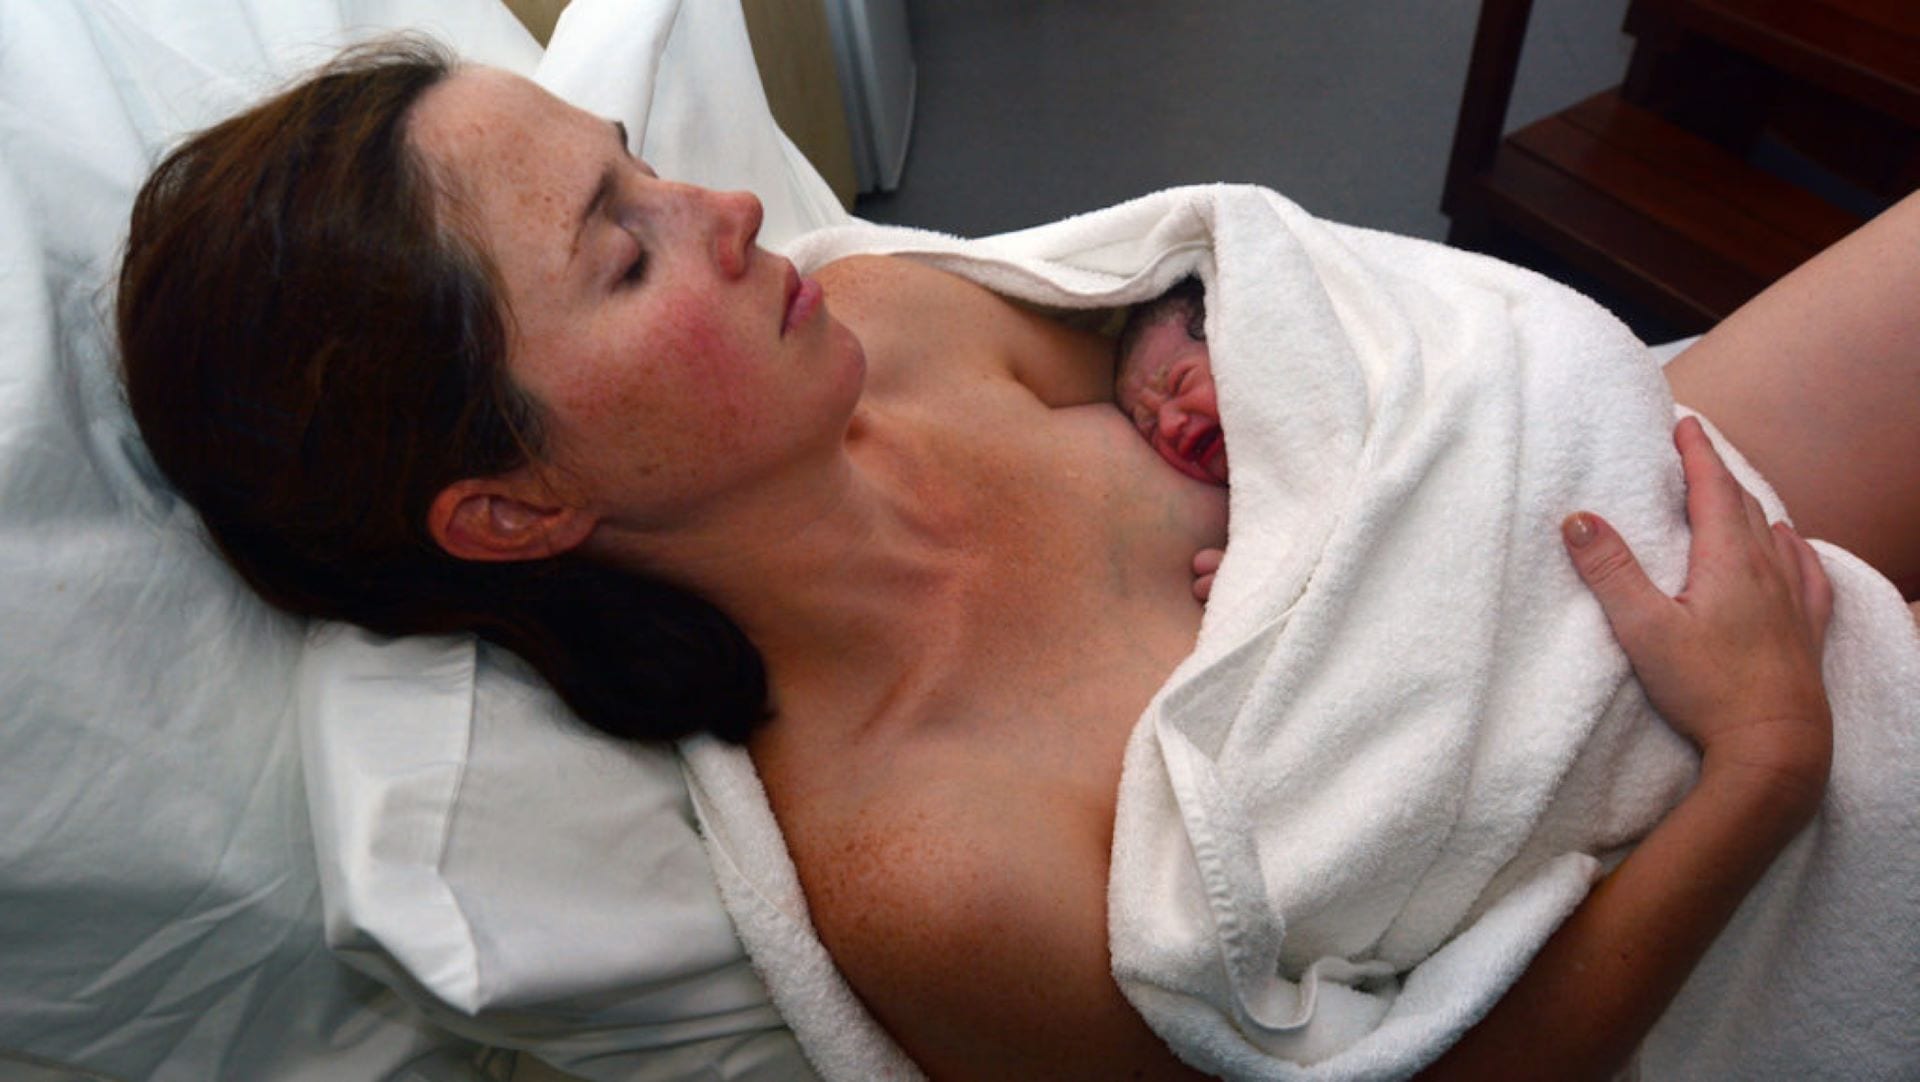 Doctors violate women's rights in delivery rooms every day